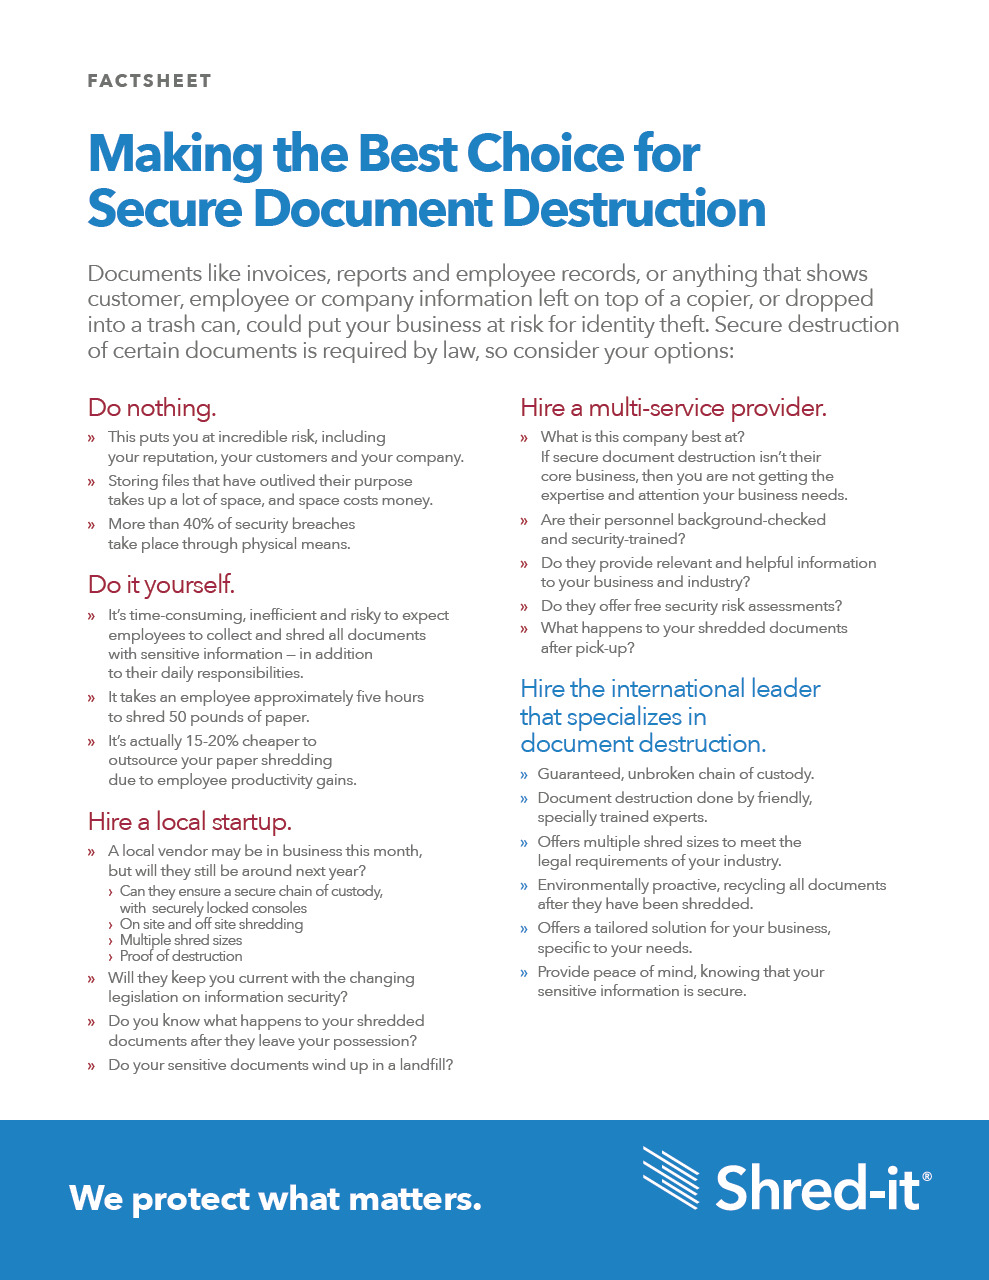 Shred-it-Making-Best-Choice-For-Secure-Document-Destruction.pdf